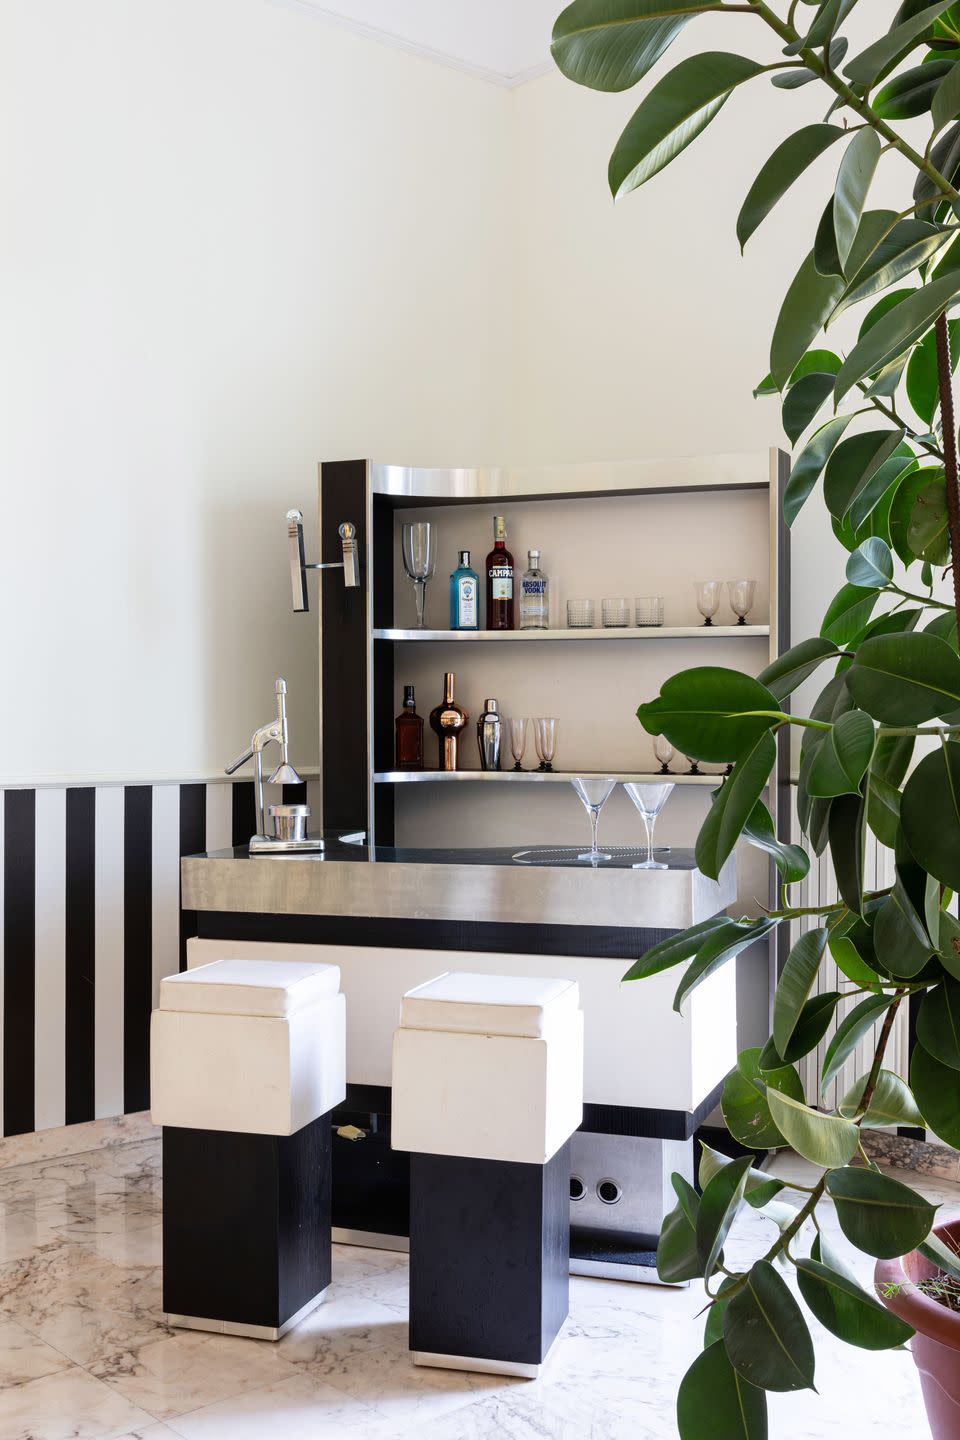 apartment of anna masello and giovanni izzo in naples photography by monica spezia living inside bar area